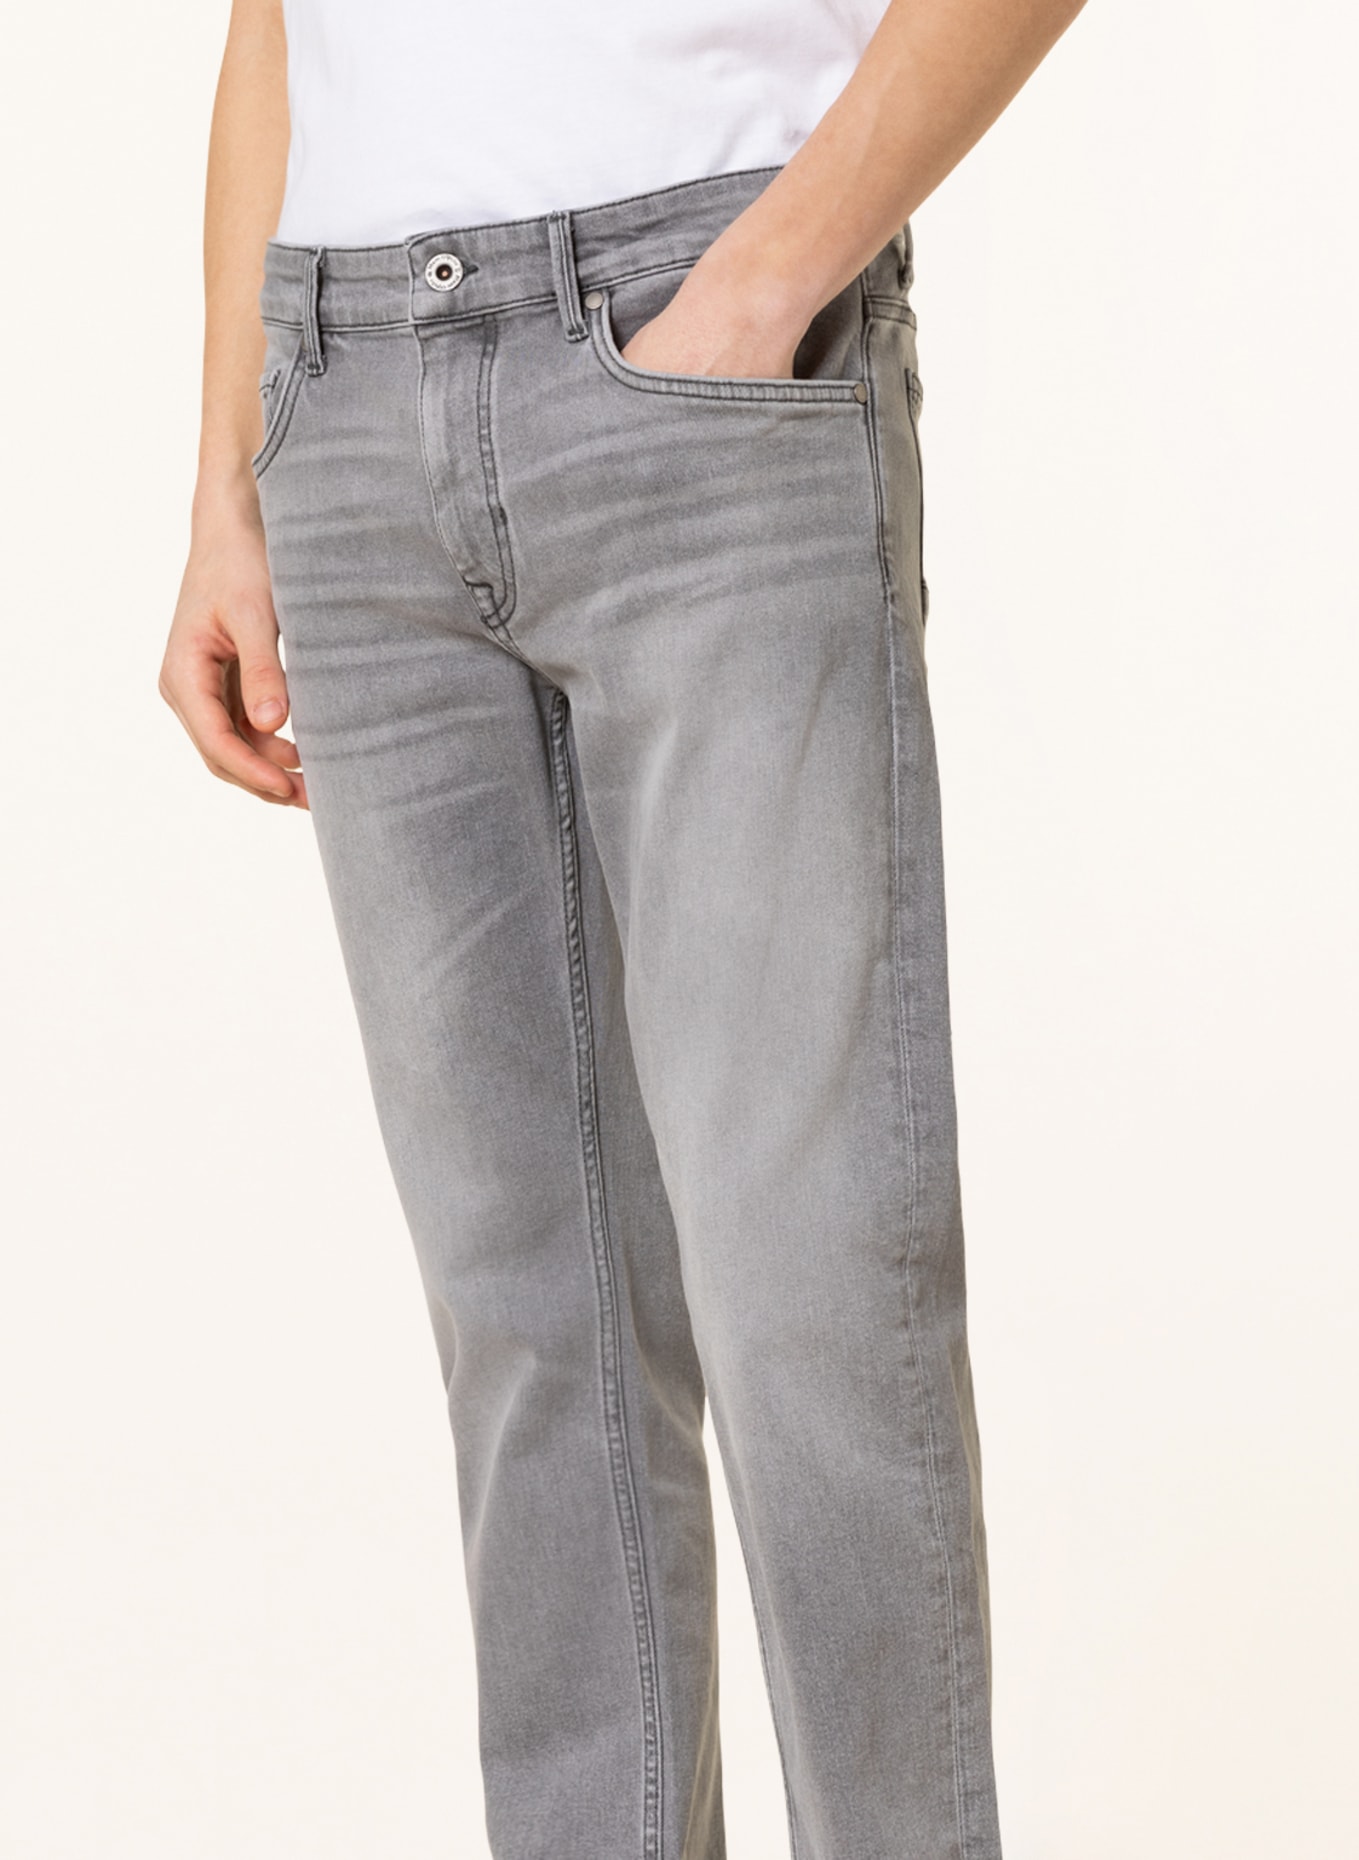 Marc O'Polo Jeans Shaped Fit, Farbe: 021 Light grey wash (Bild 5)